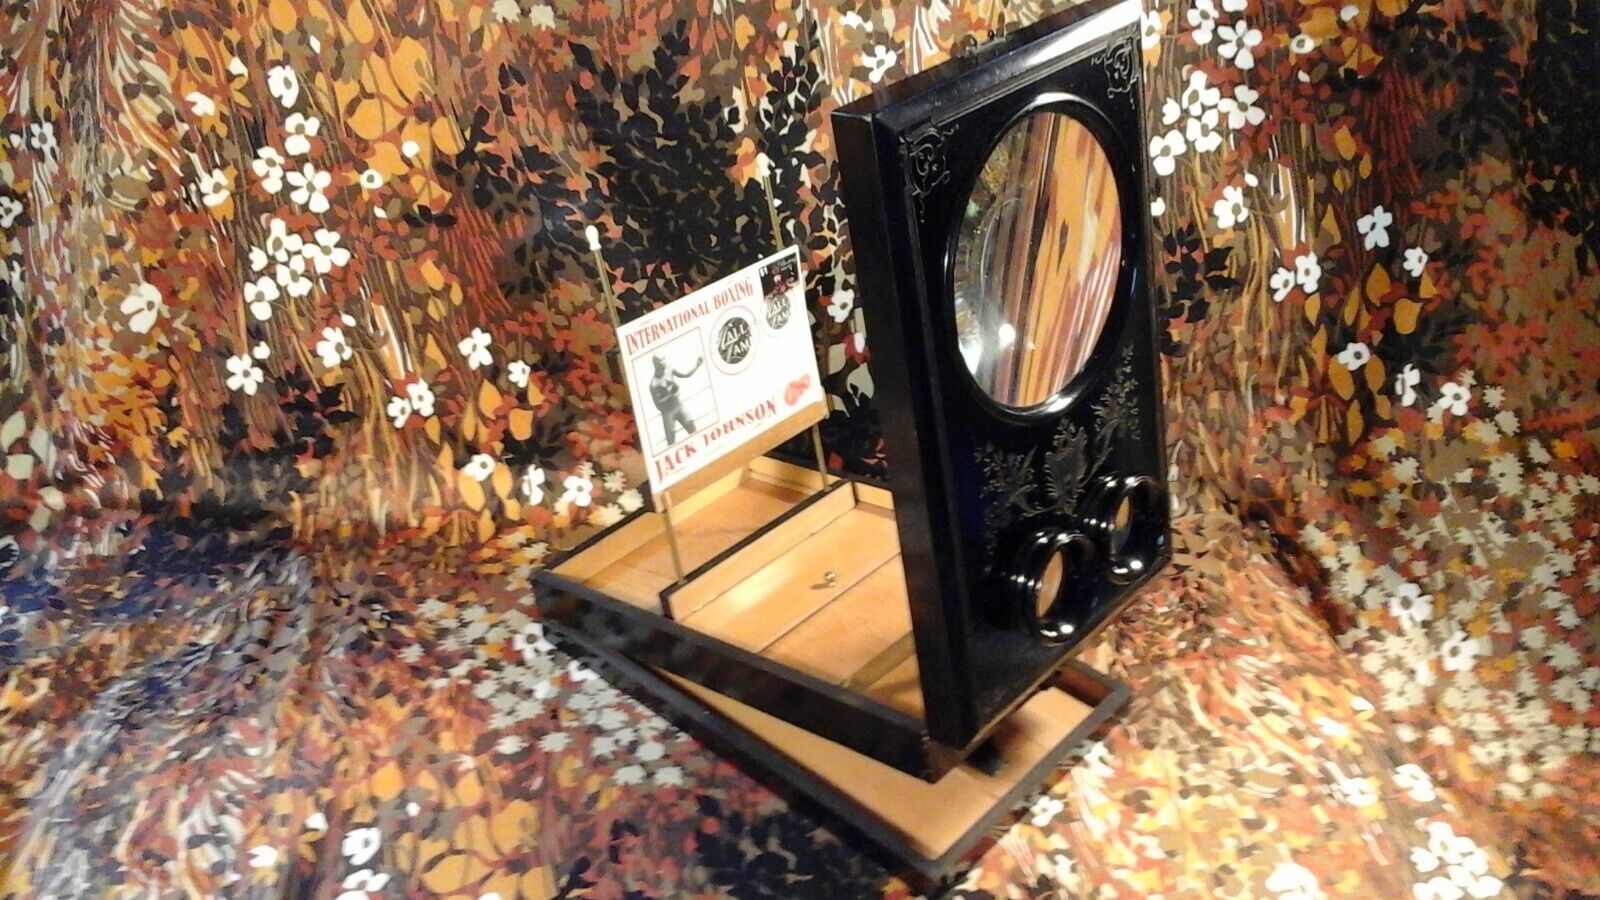 EBONiSED GRAPHOSCOPE + STEREOSCOPE  \'ViCTORiAN\'  c.1885  ***ETCHED ENGRAVED WOOD